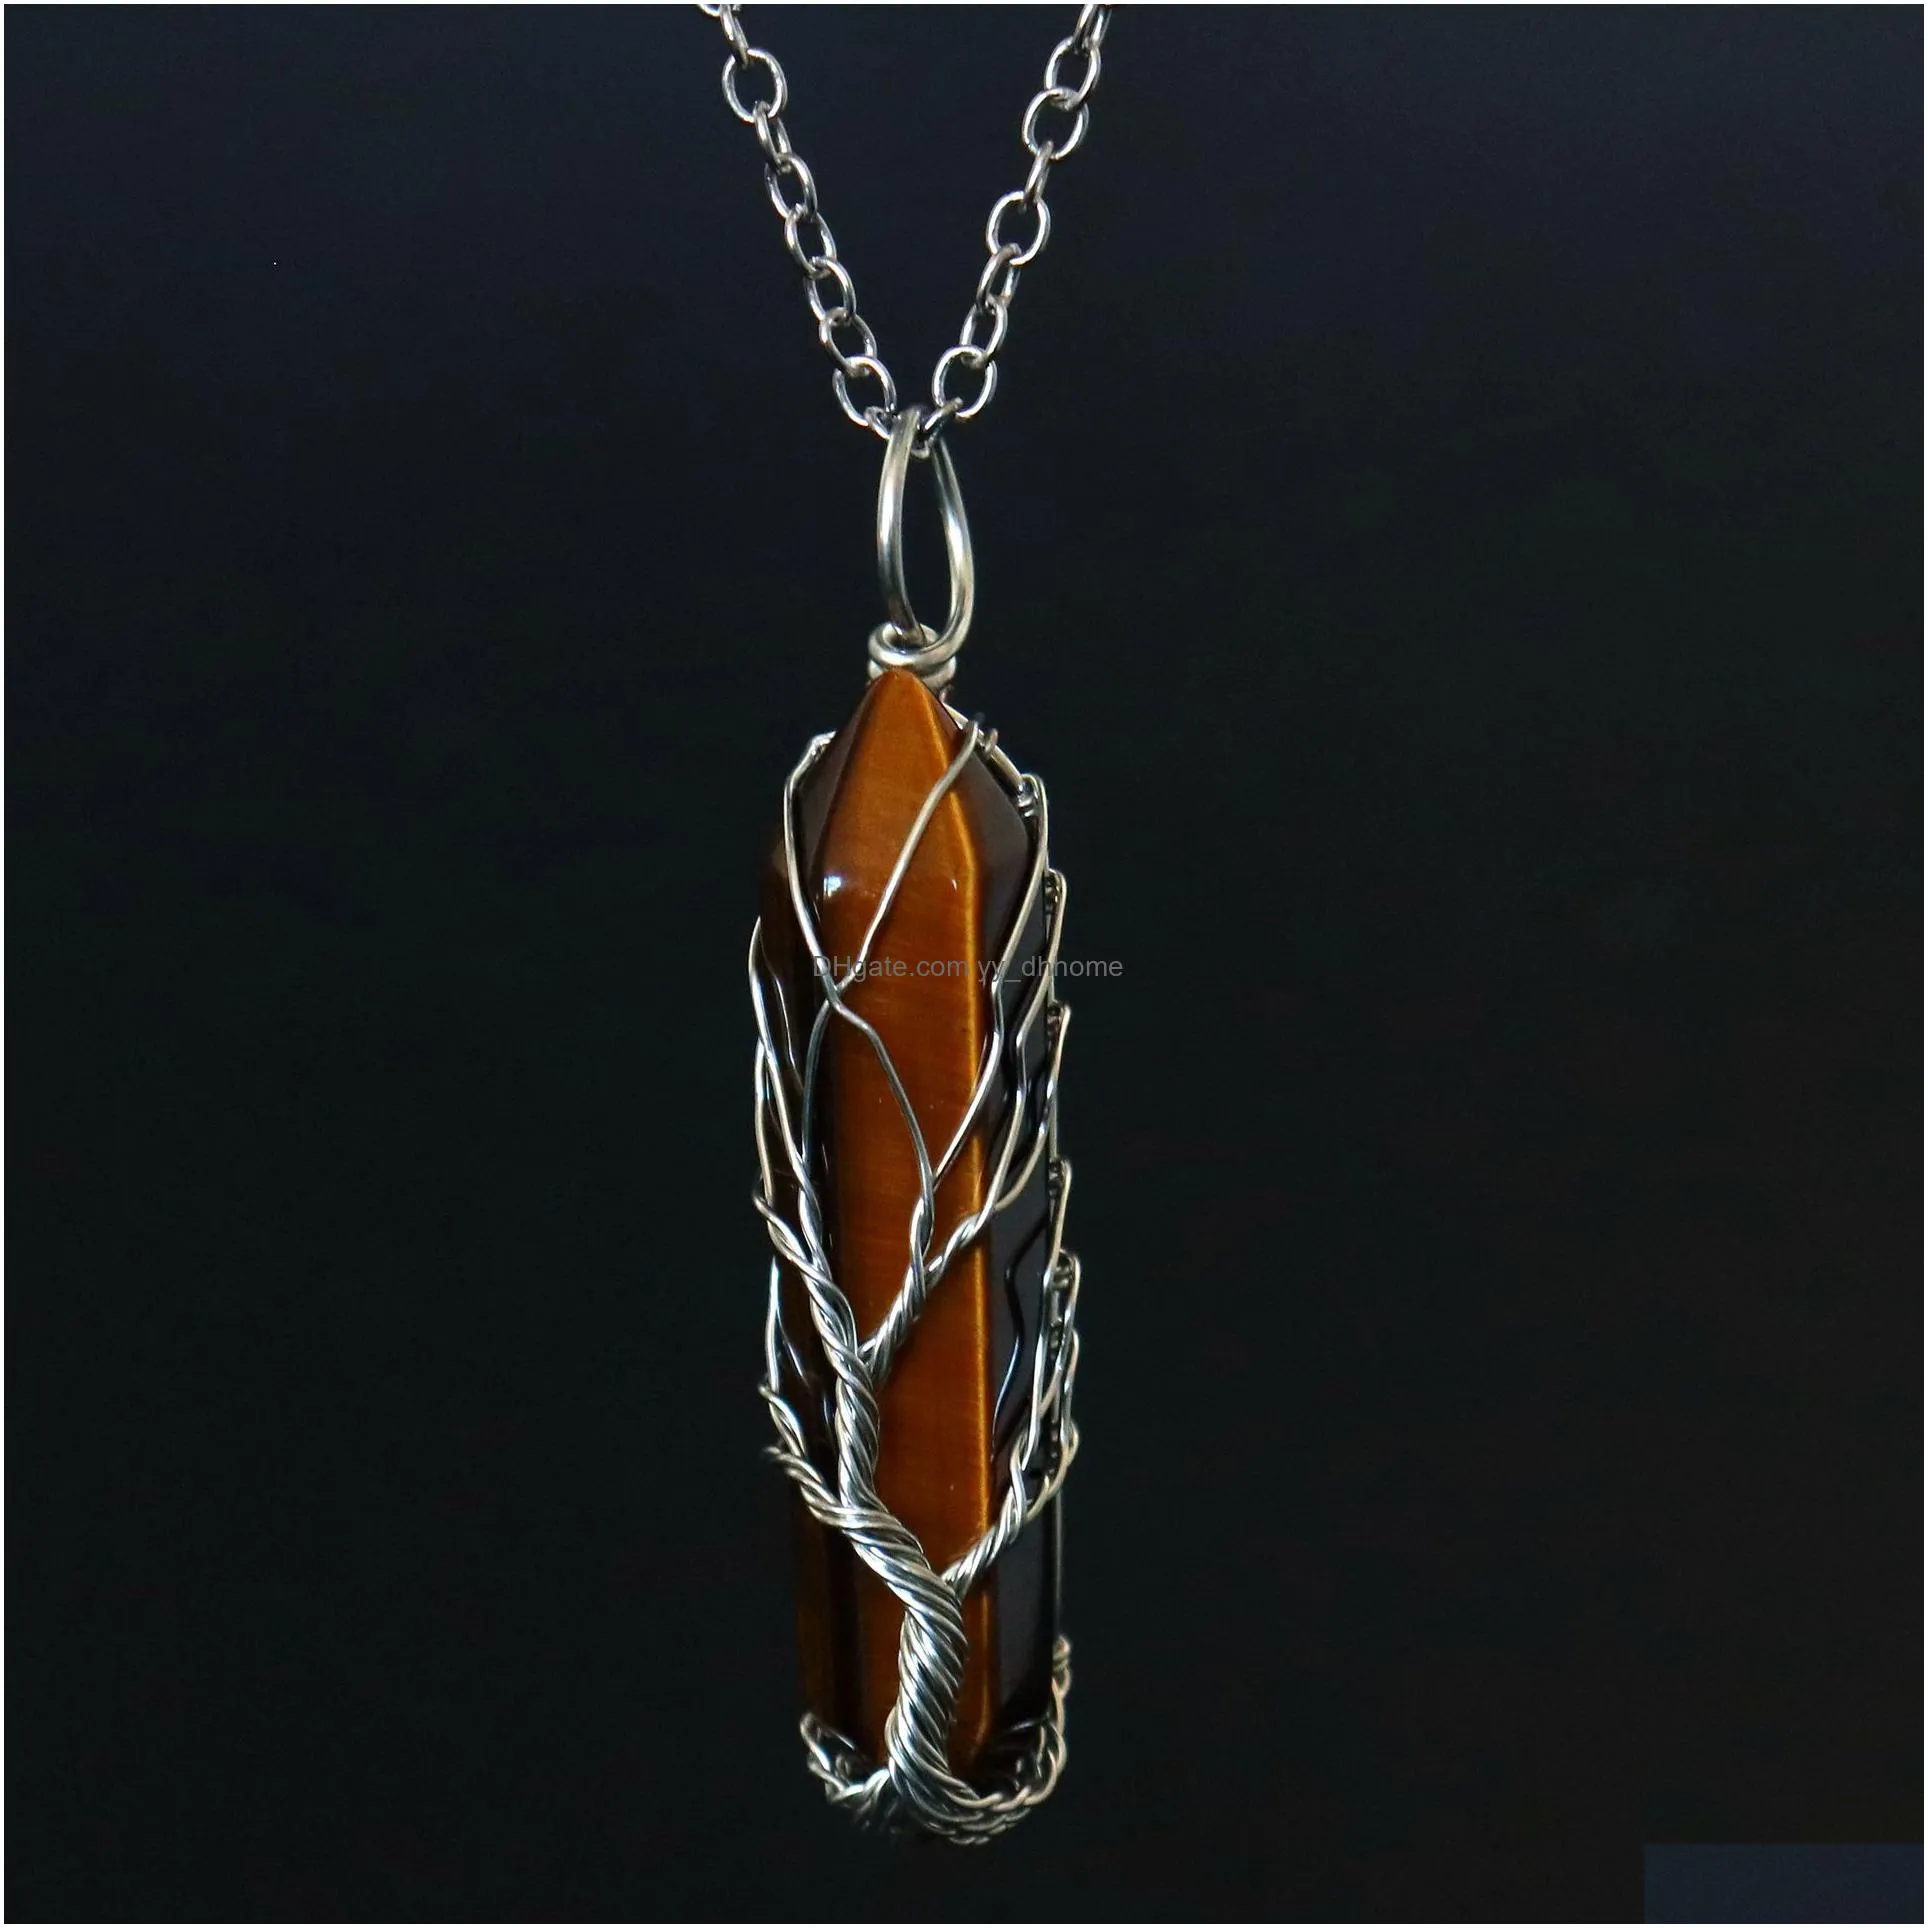 healing crystal natural stone hexagon pillar charms necklaces twine tree of life wire wrap pendant turquoise amethyst tiger eye rose quartz wholesale jewelry